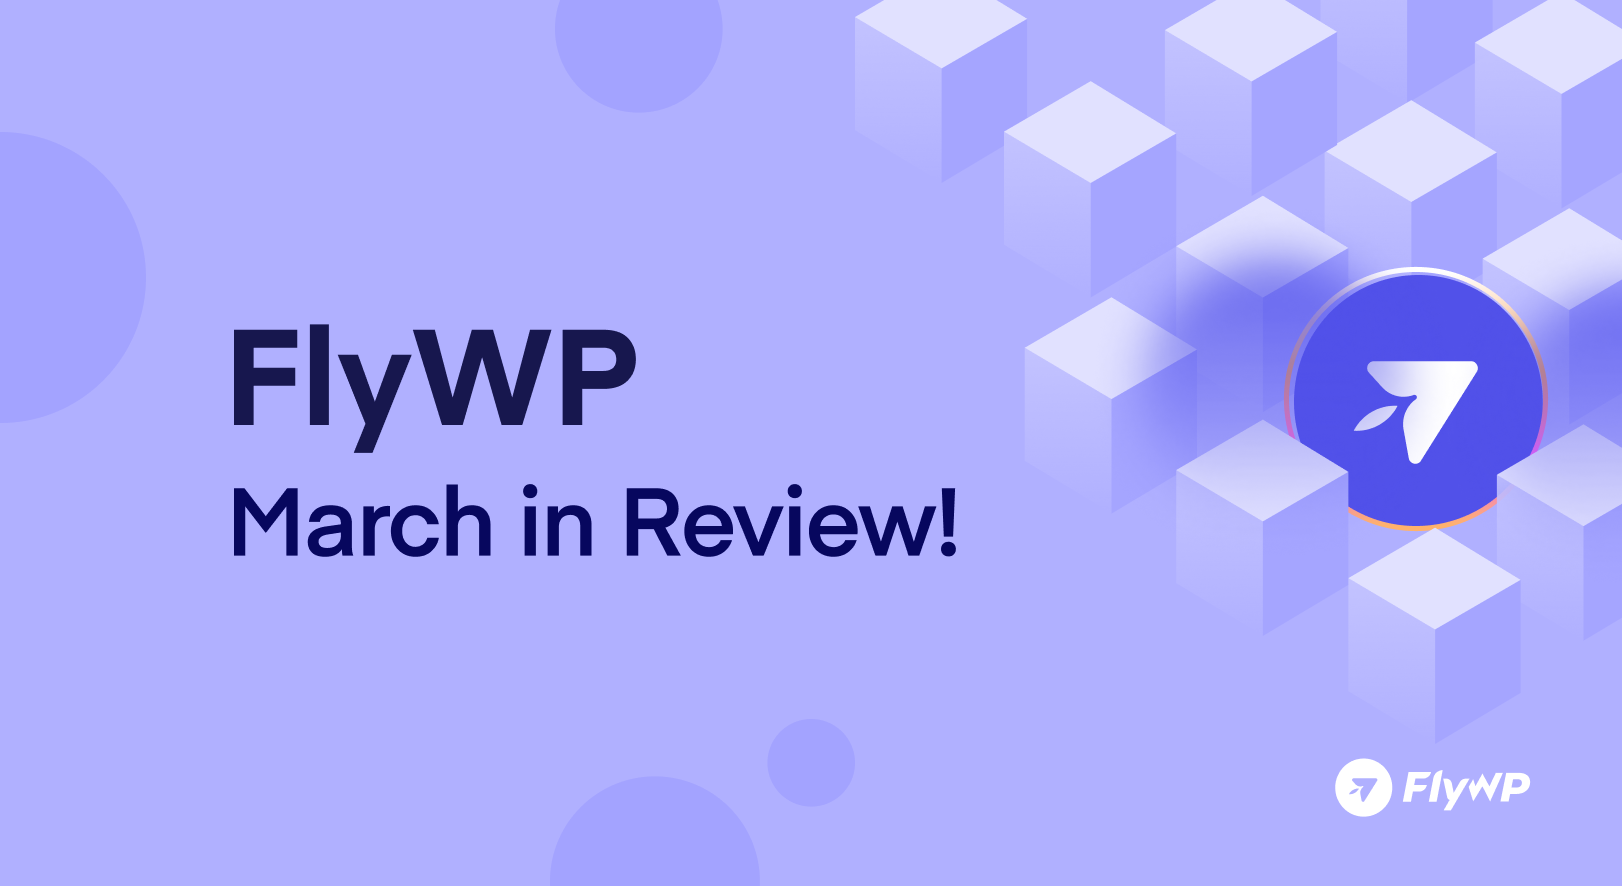 Flywp March In Review!